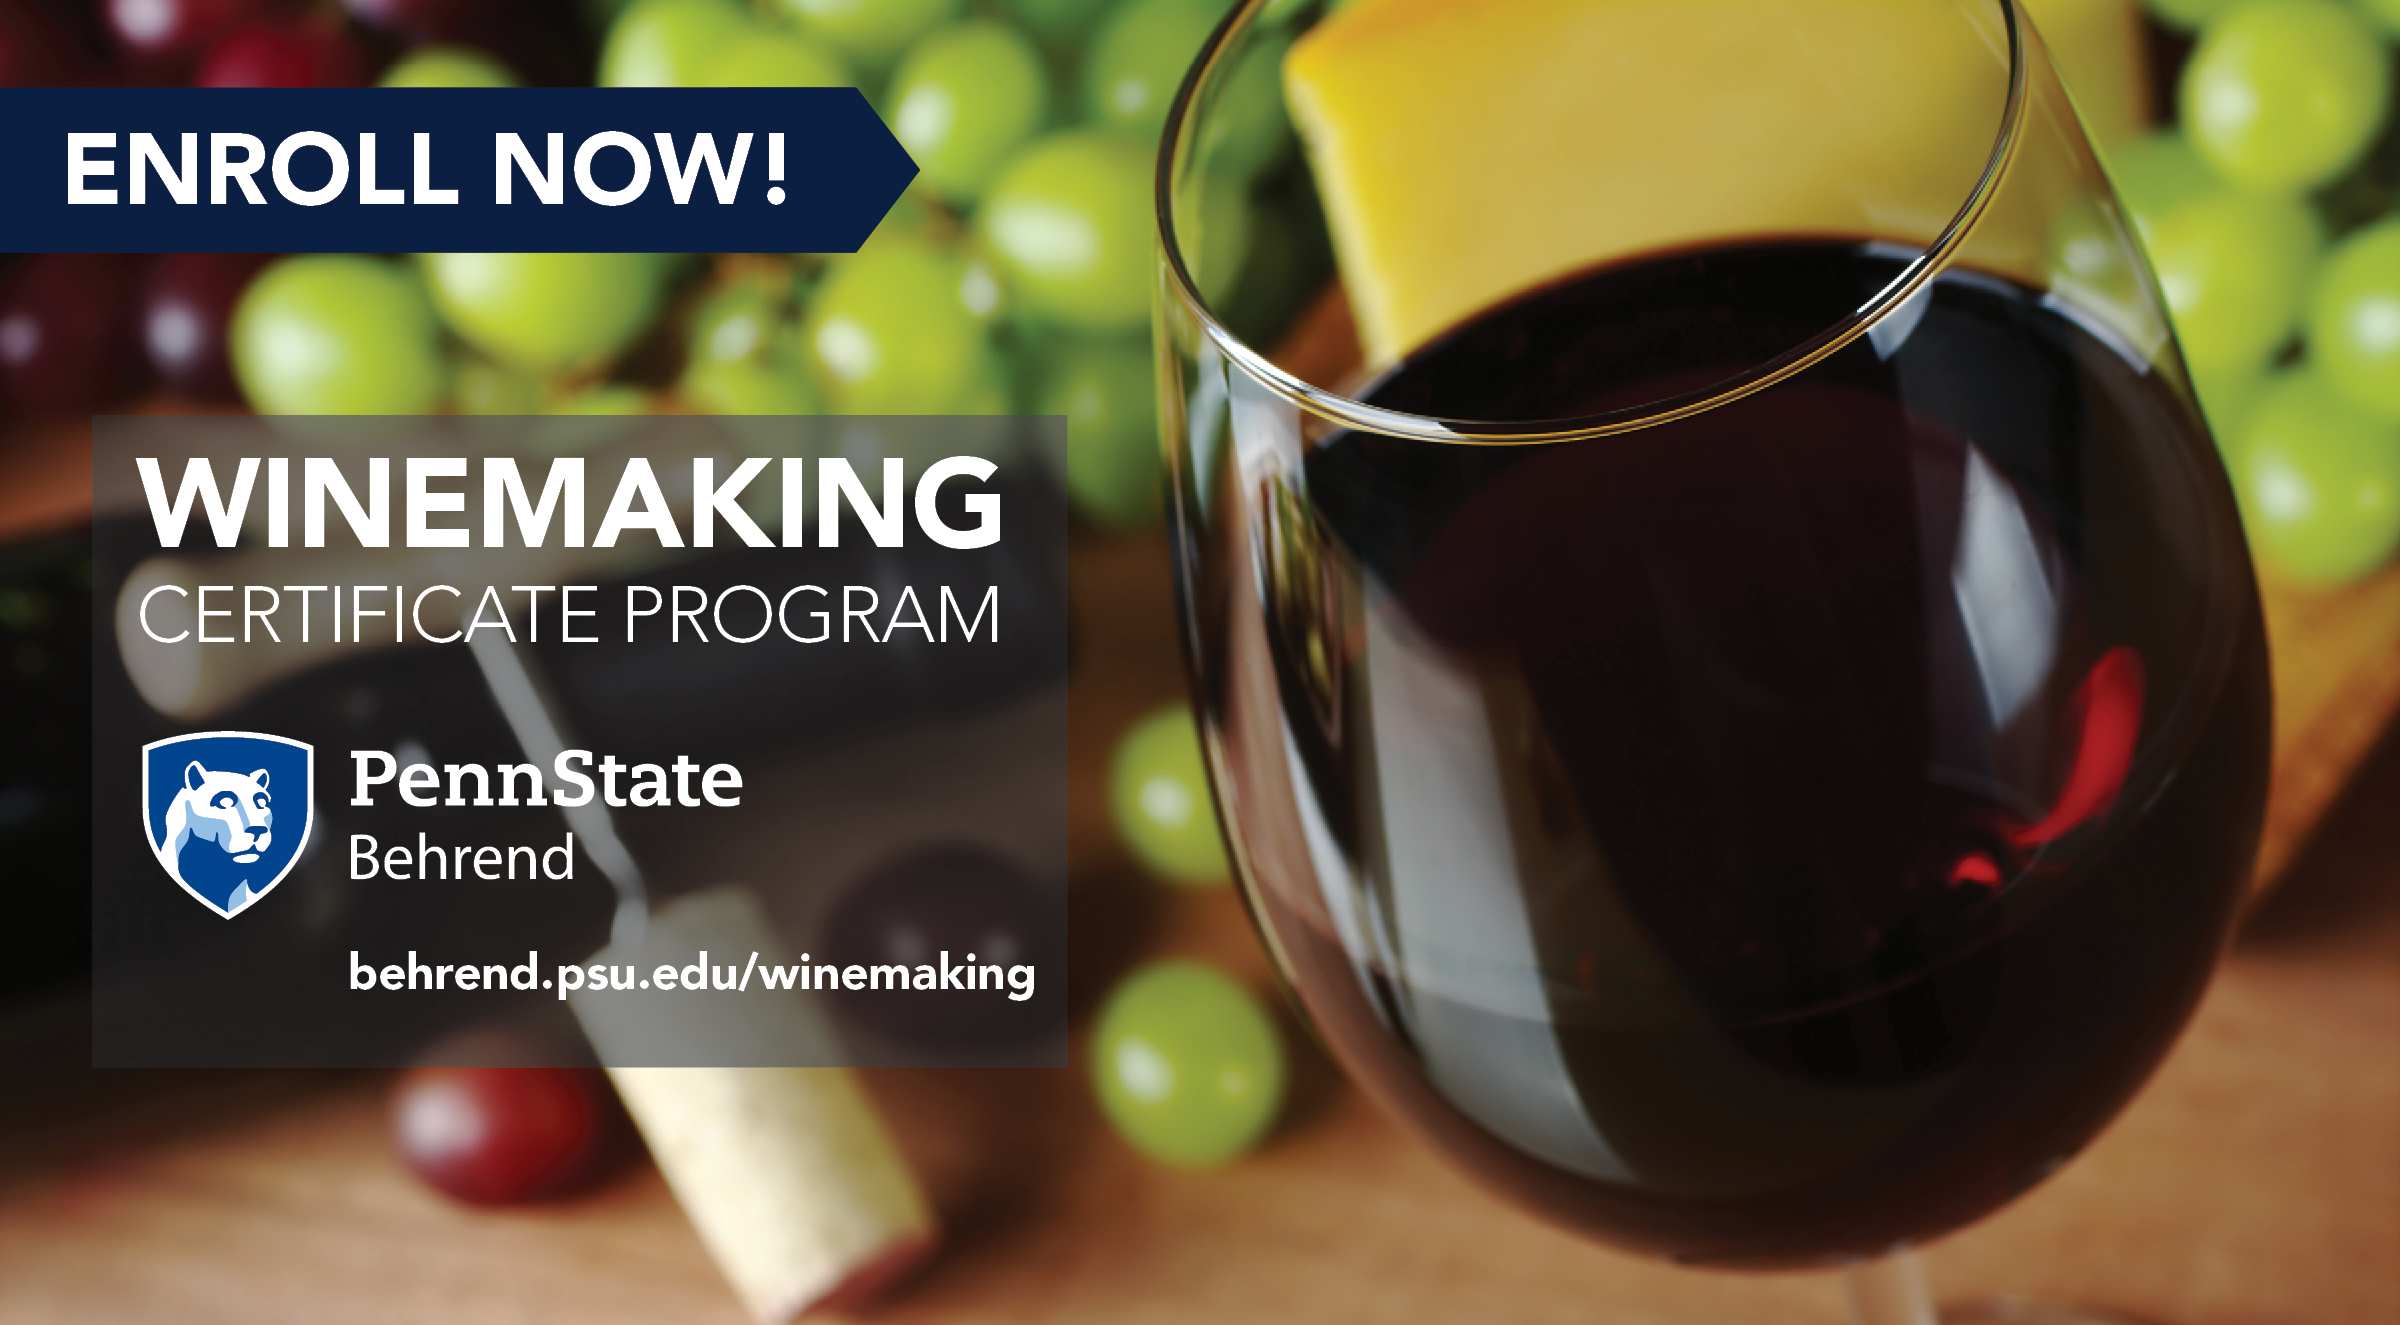 Registration is now open for the Winemaking Certificate Series at Penn State Behrend.